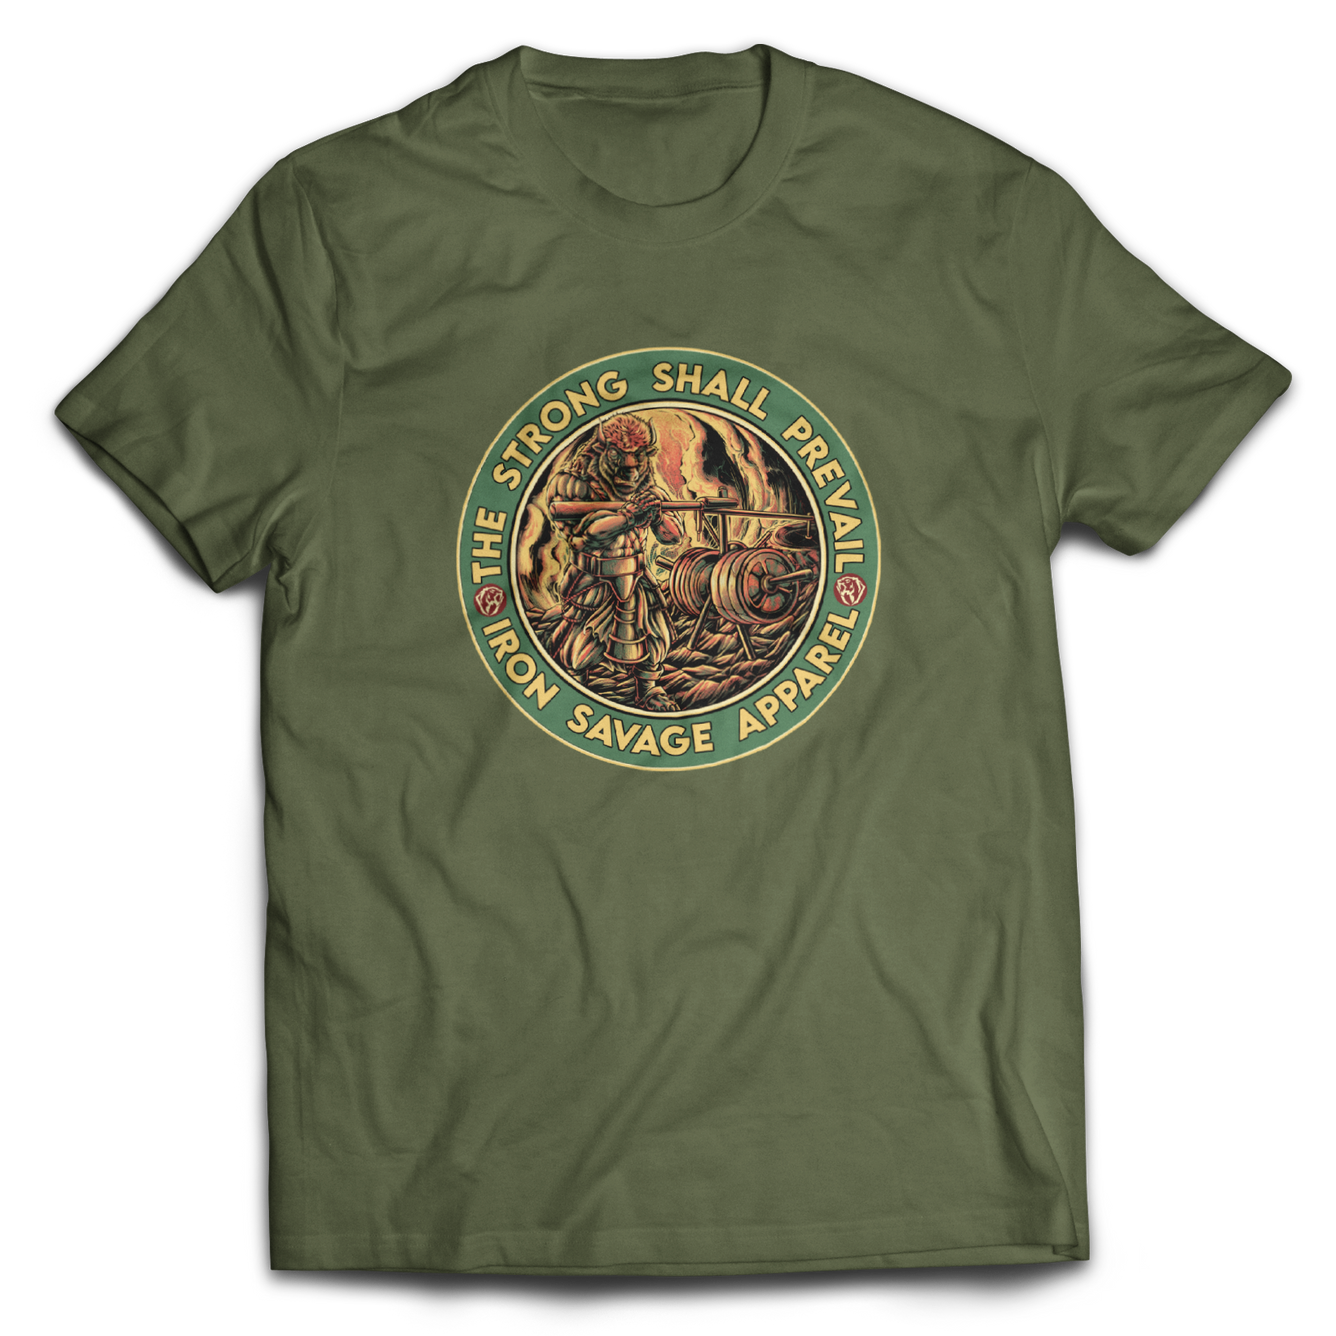 Bison: The Strong Shall Prevail Unisex T-Shirt